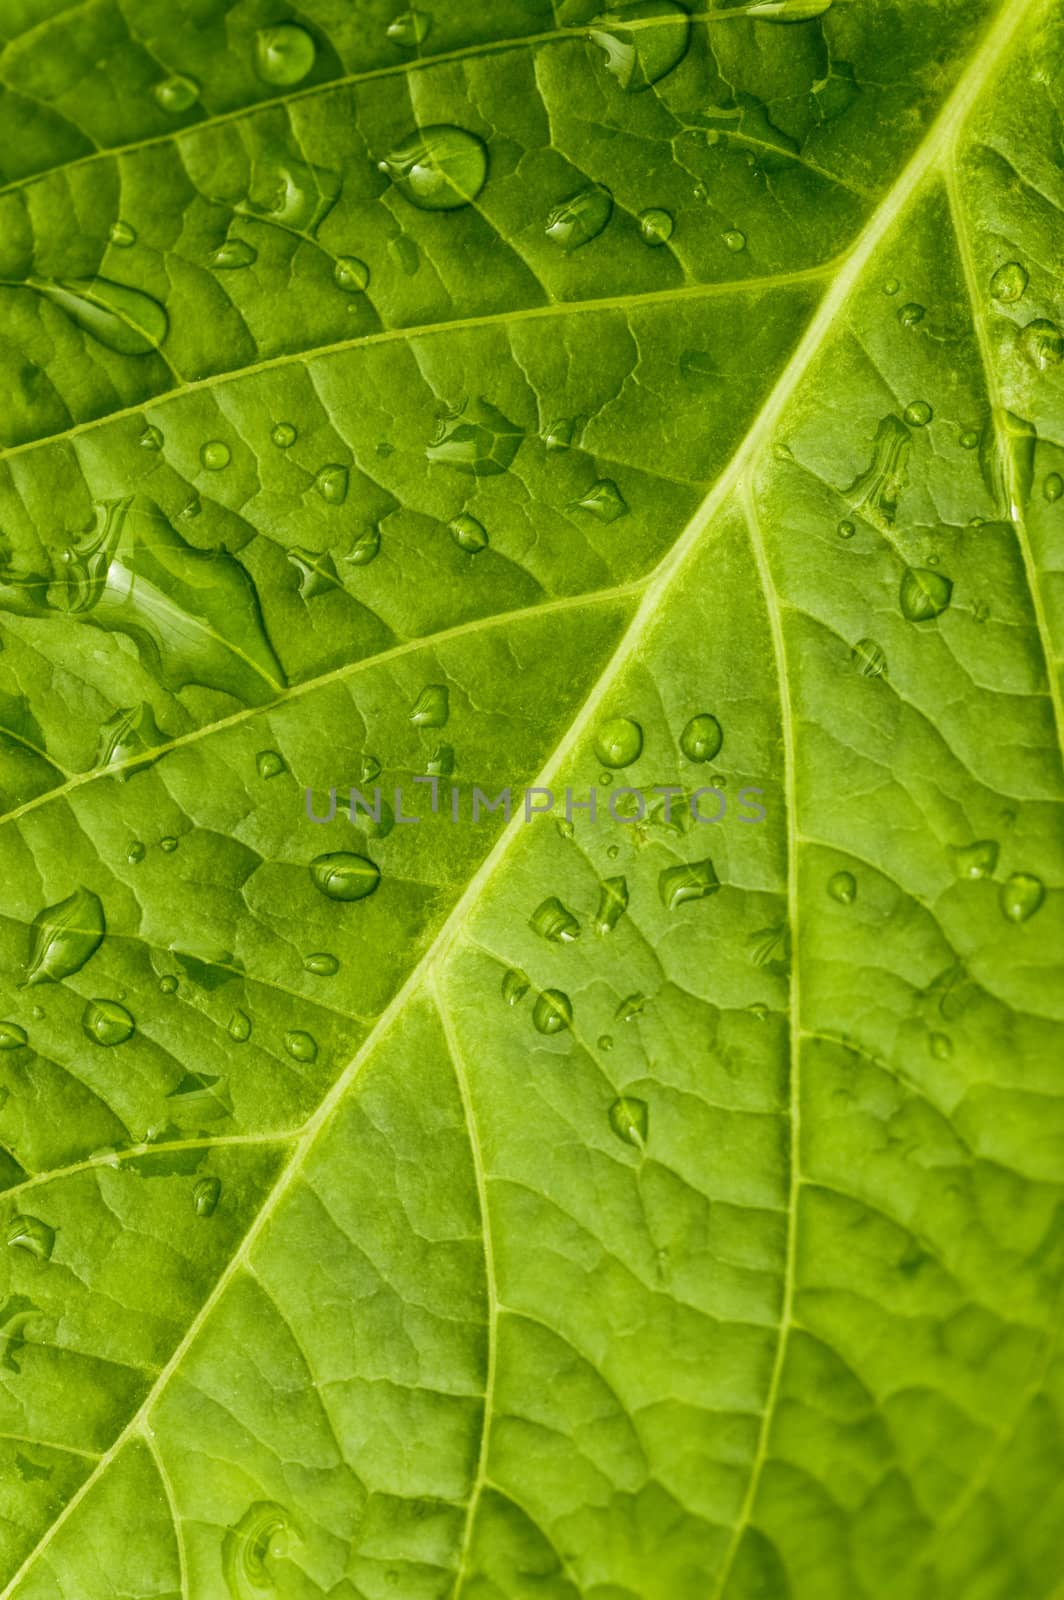 Macro in leaf with water drops.